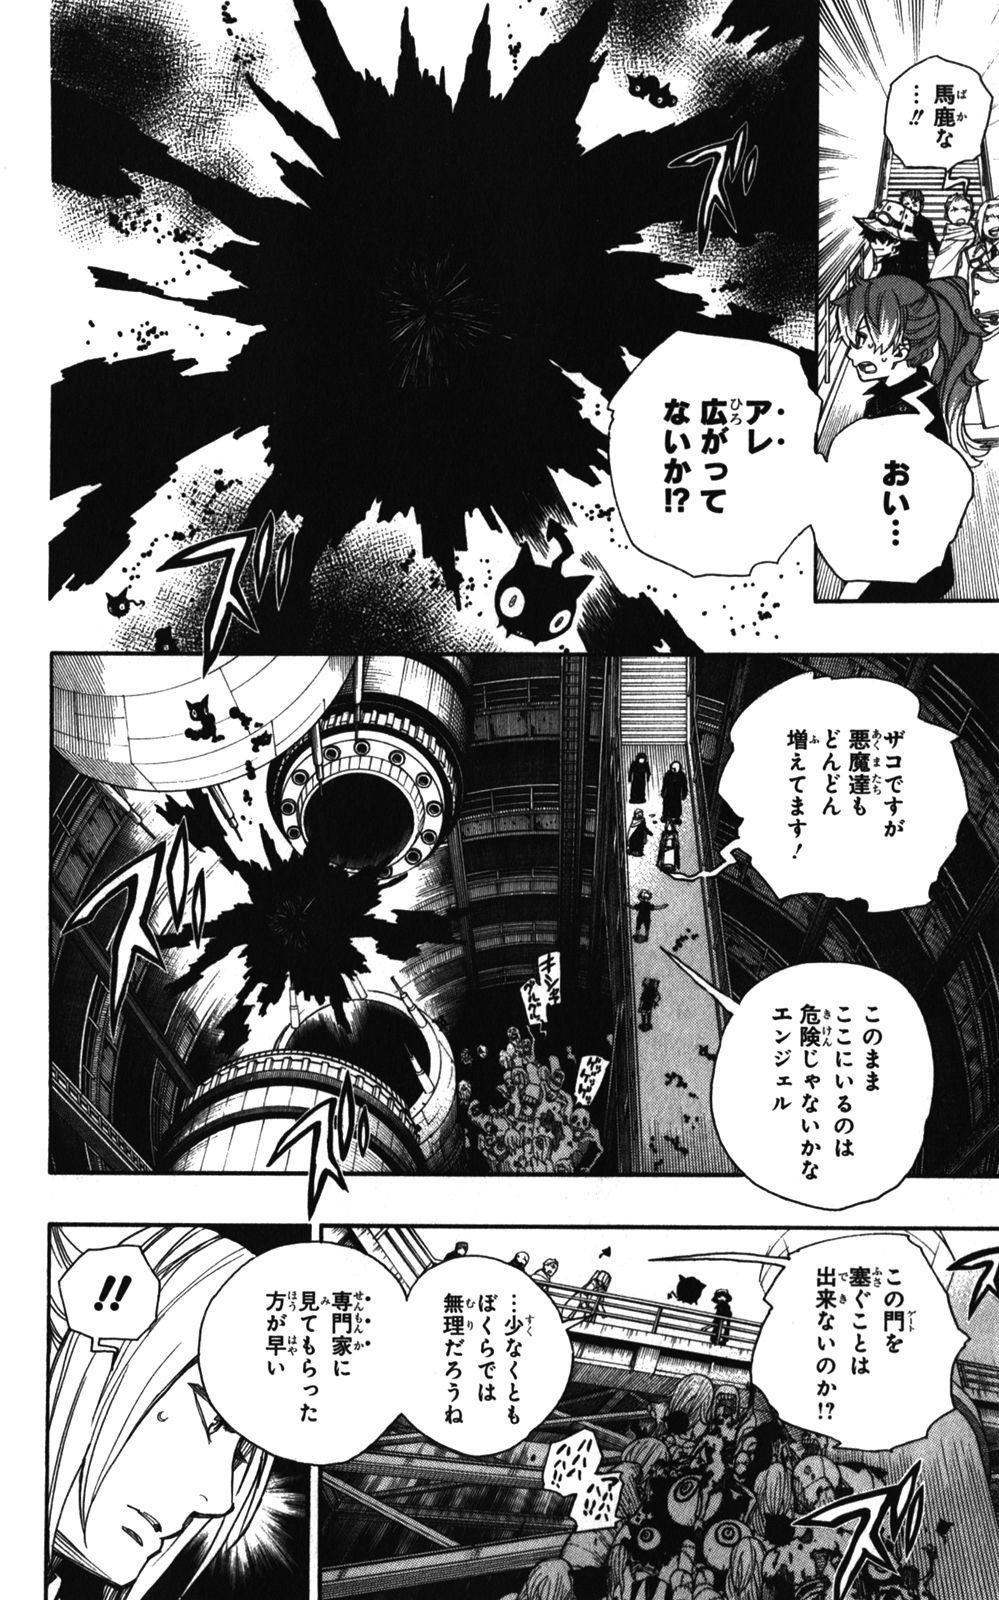 Ao no Exorcist - Chapter 40 - Page 2